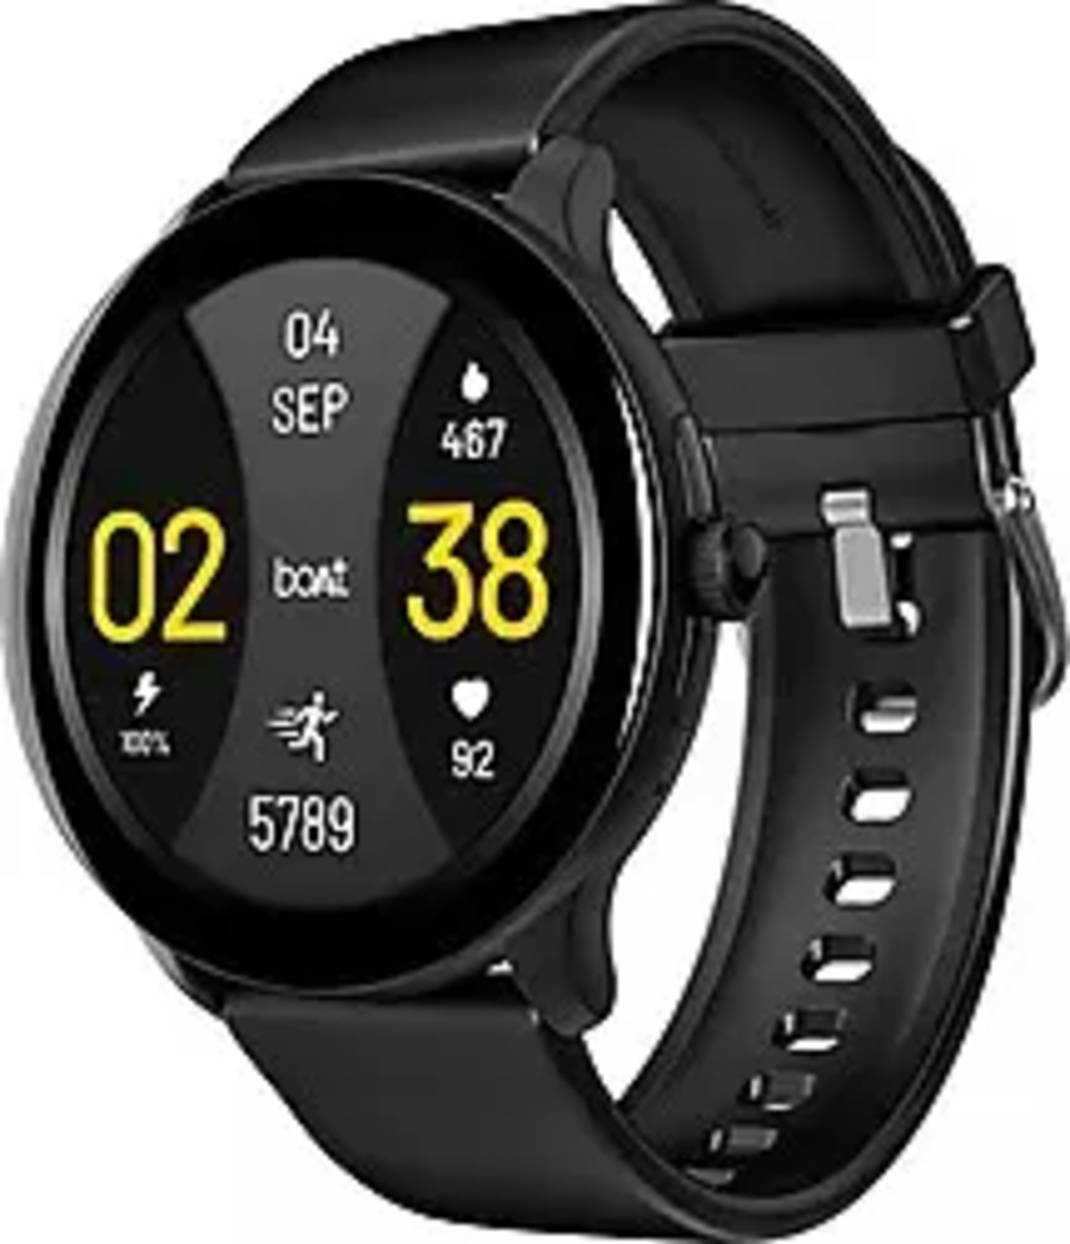 boAt Lunar Pro LTE - e-SIM Enabled Smartwatch with 1.39 AMOLED Display